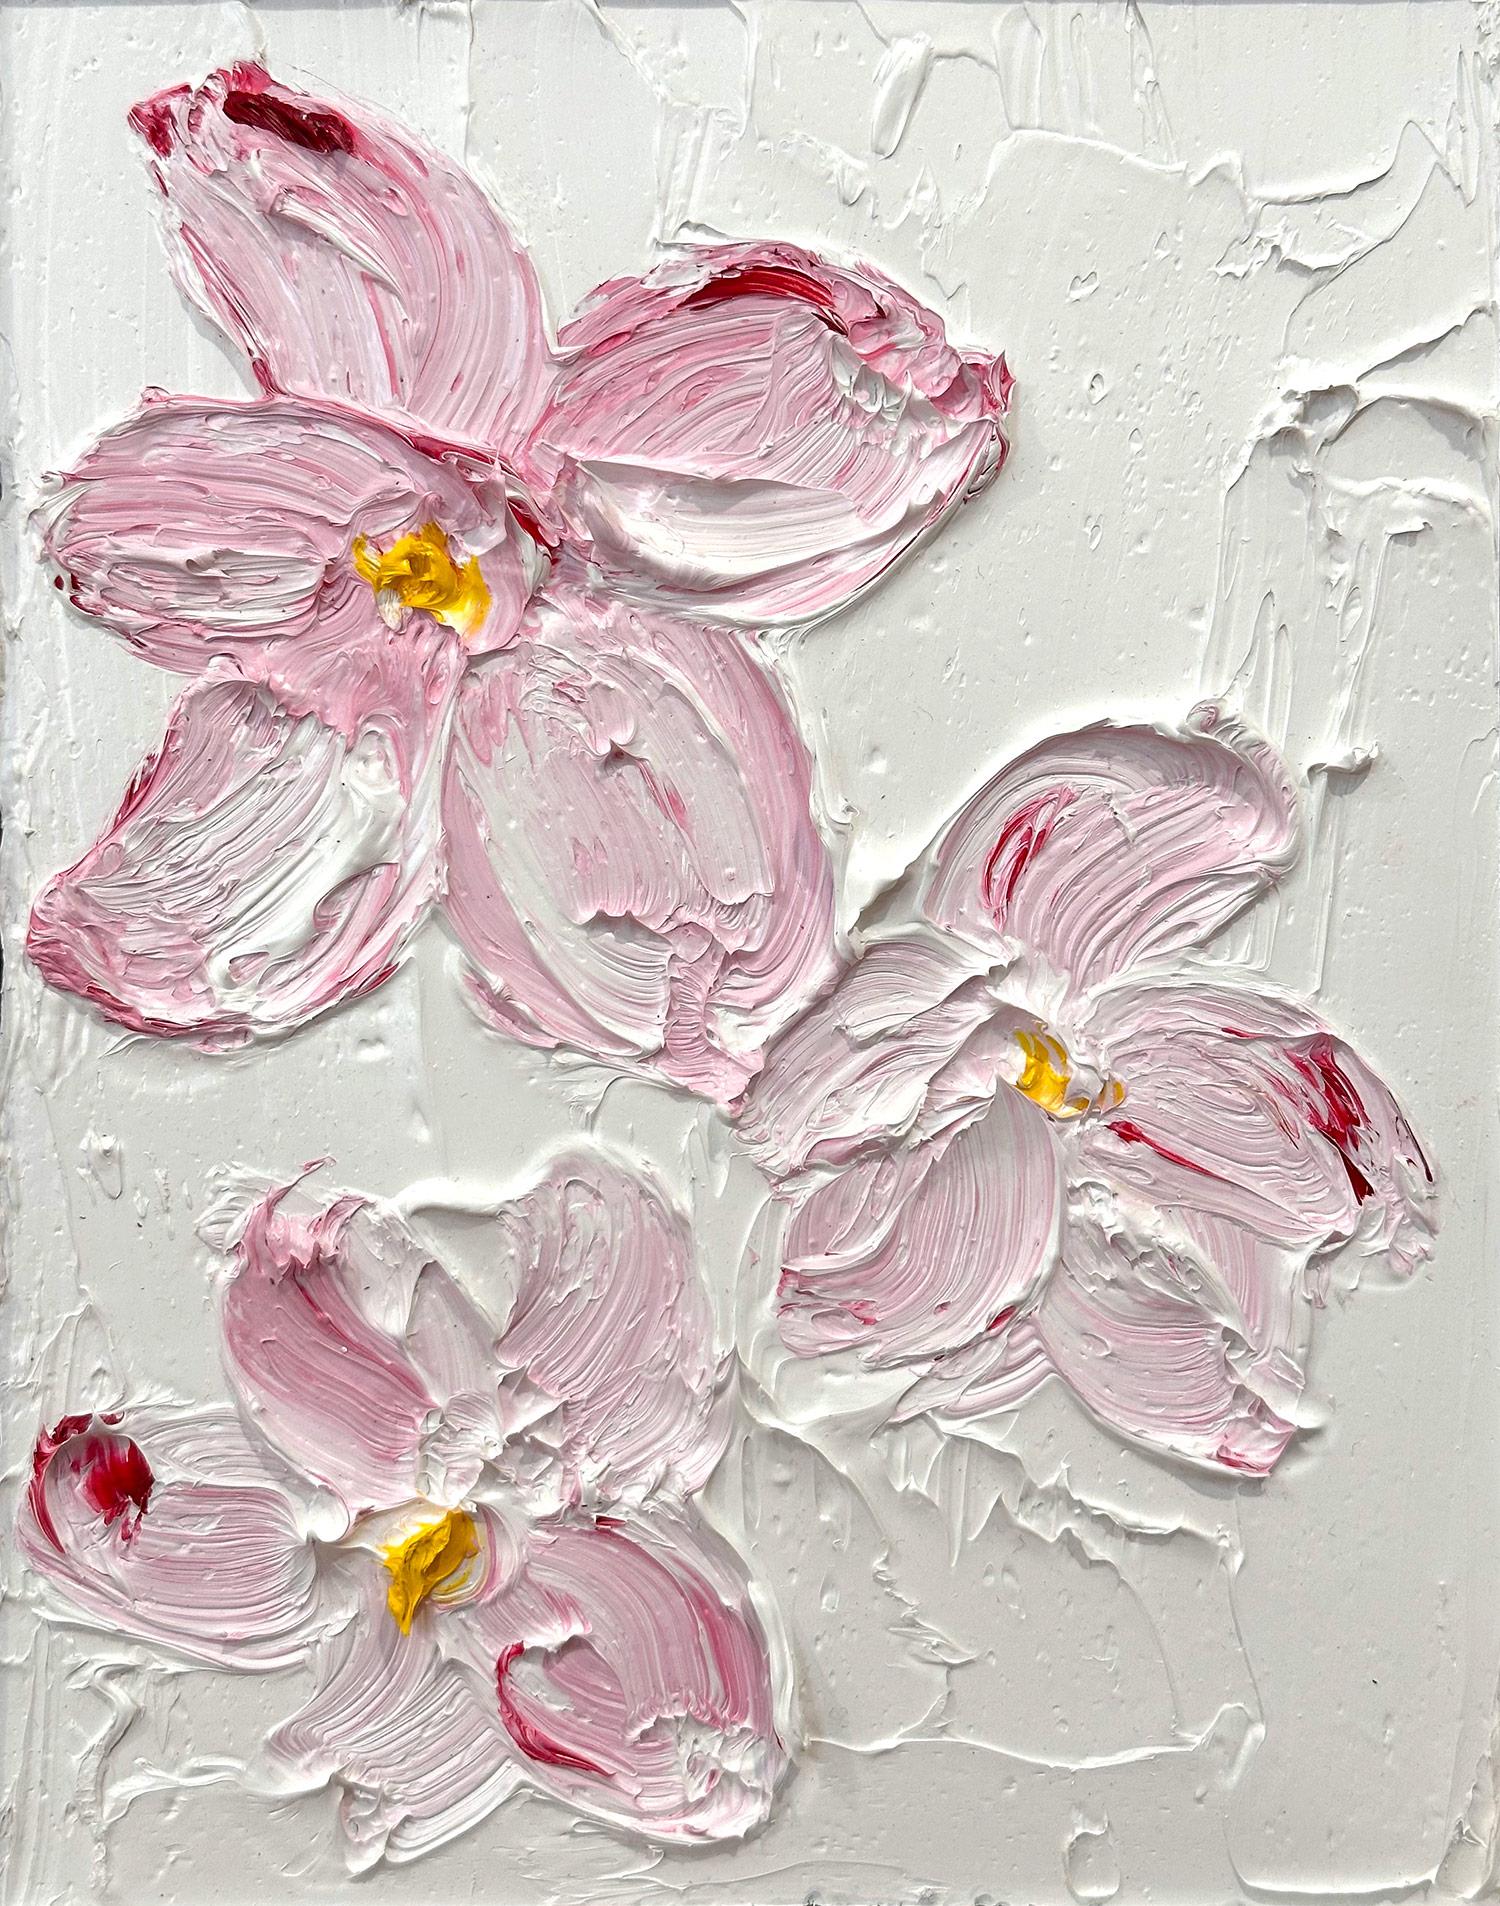 This piece depicts three lush Magnolias with thick textured oil paint in calming tones of pink, white, and pops of yellow. Focusing on the petals almost creating an almost 3D effect, the impasto paint is able to capture light and shadow wonderfully